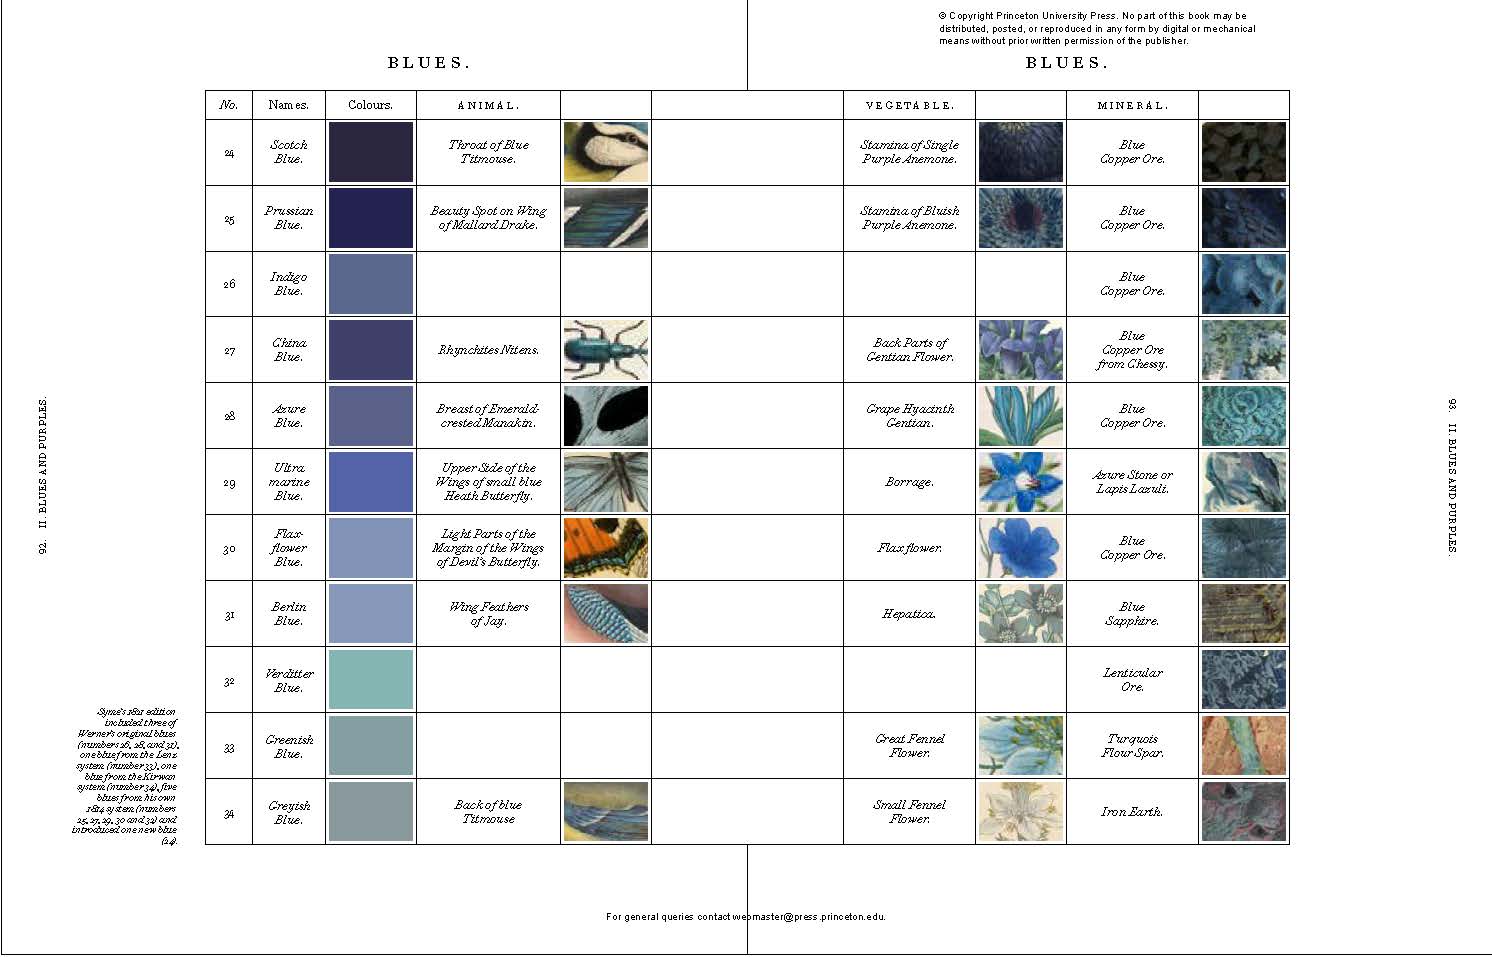 Nature's Palette: A Color Reference System from the Natural World